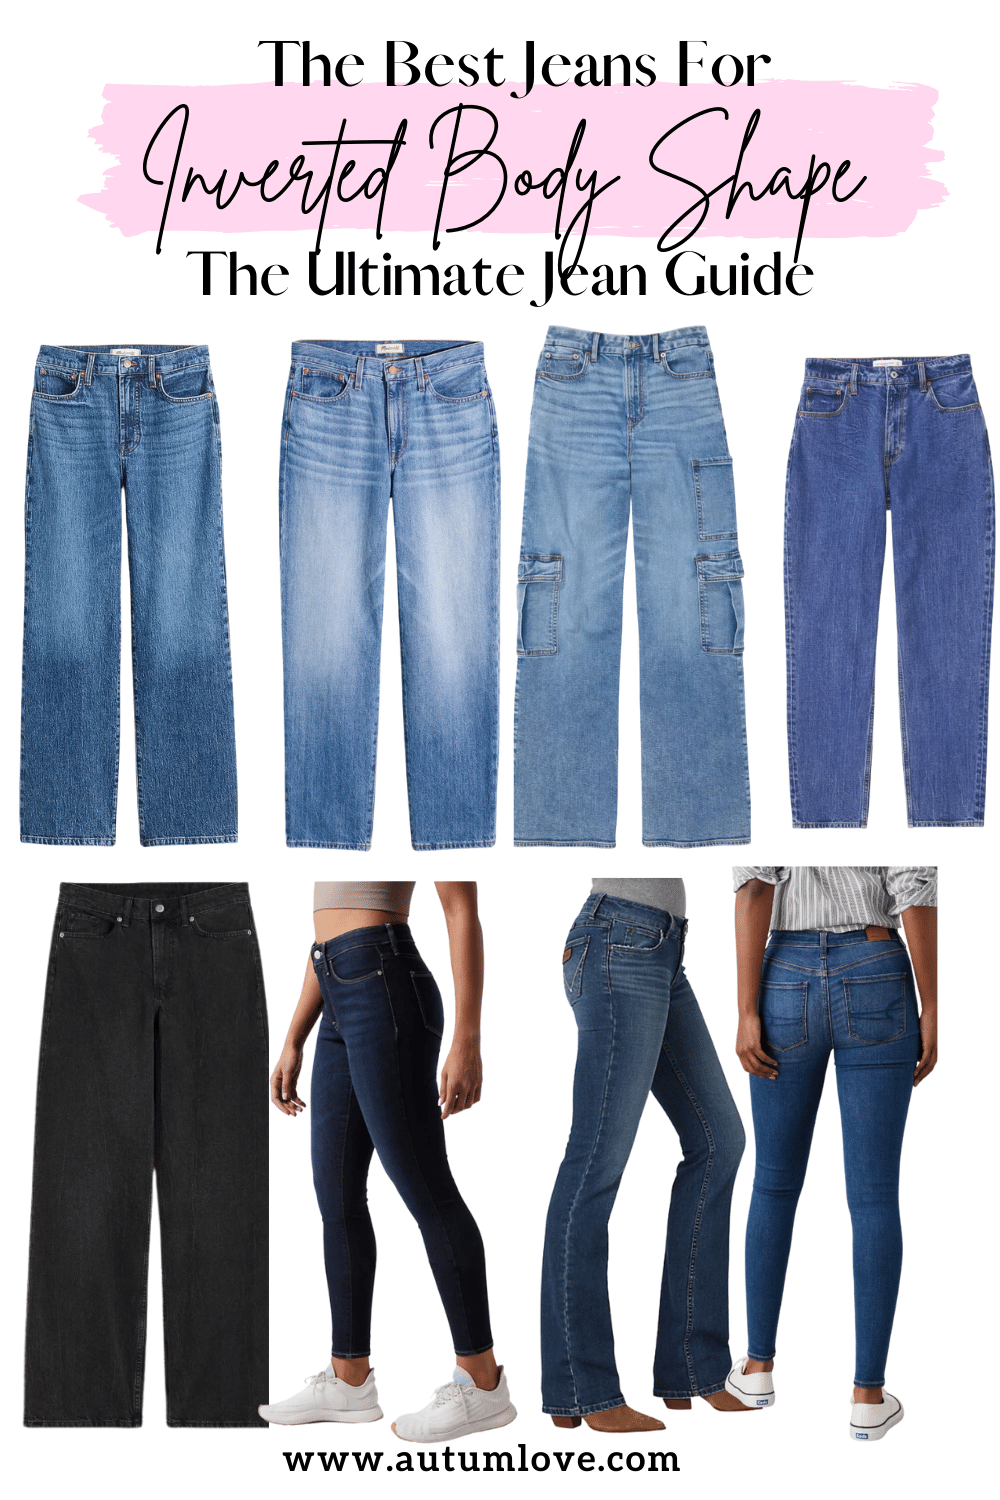 10 Best Jeans for Inverted Triangle Body Shapes: The Ultimate